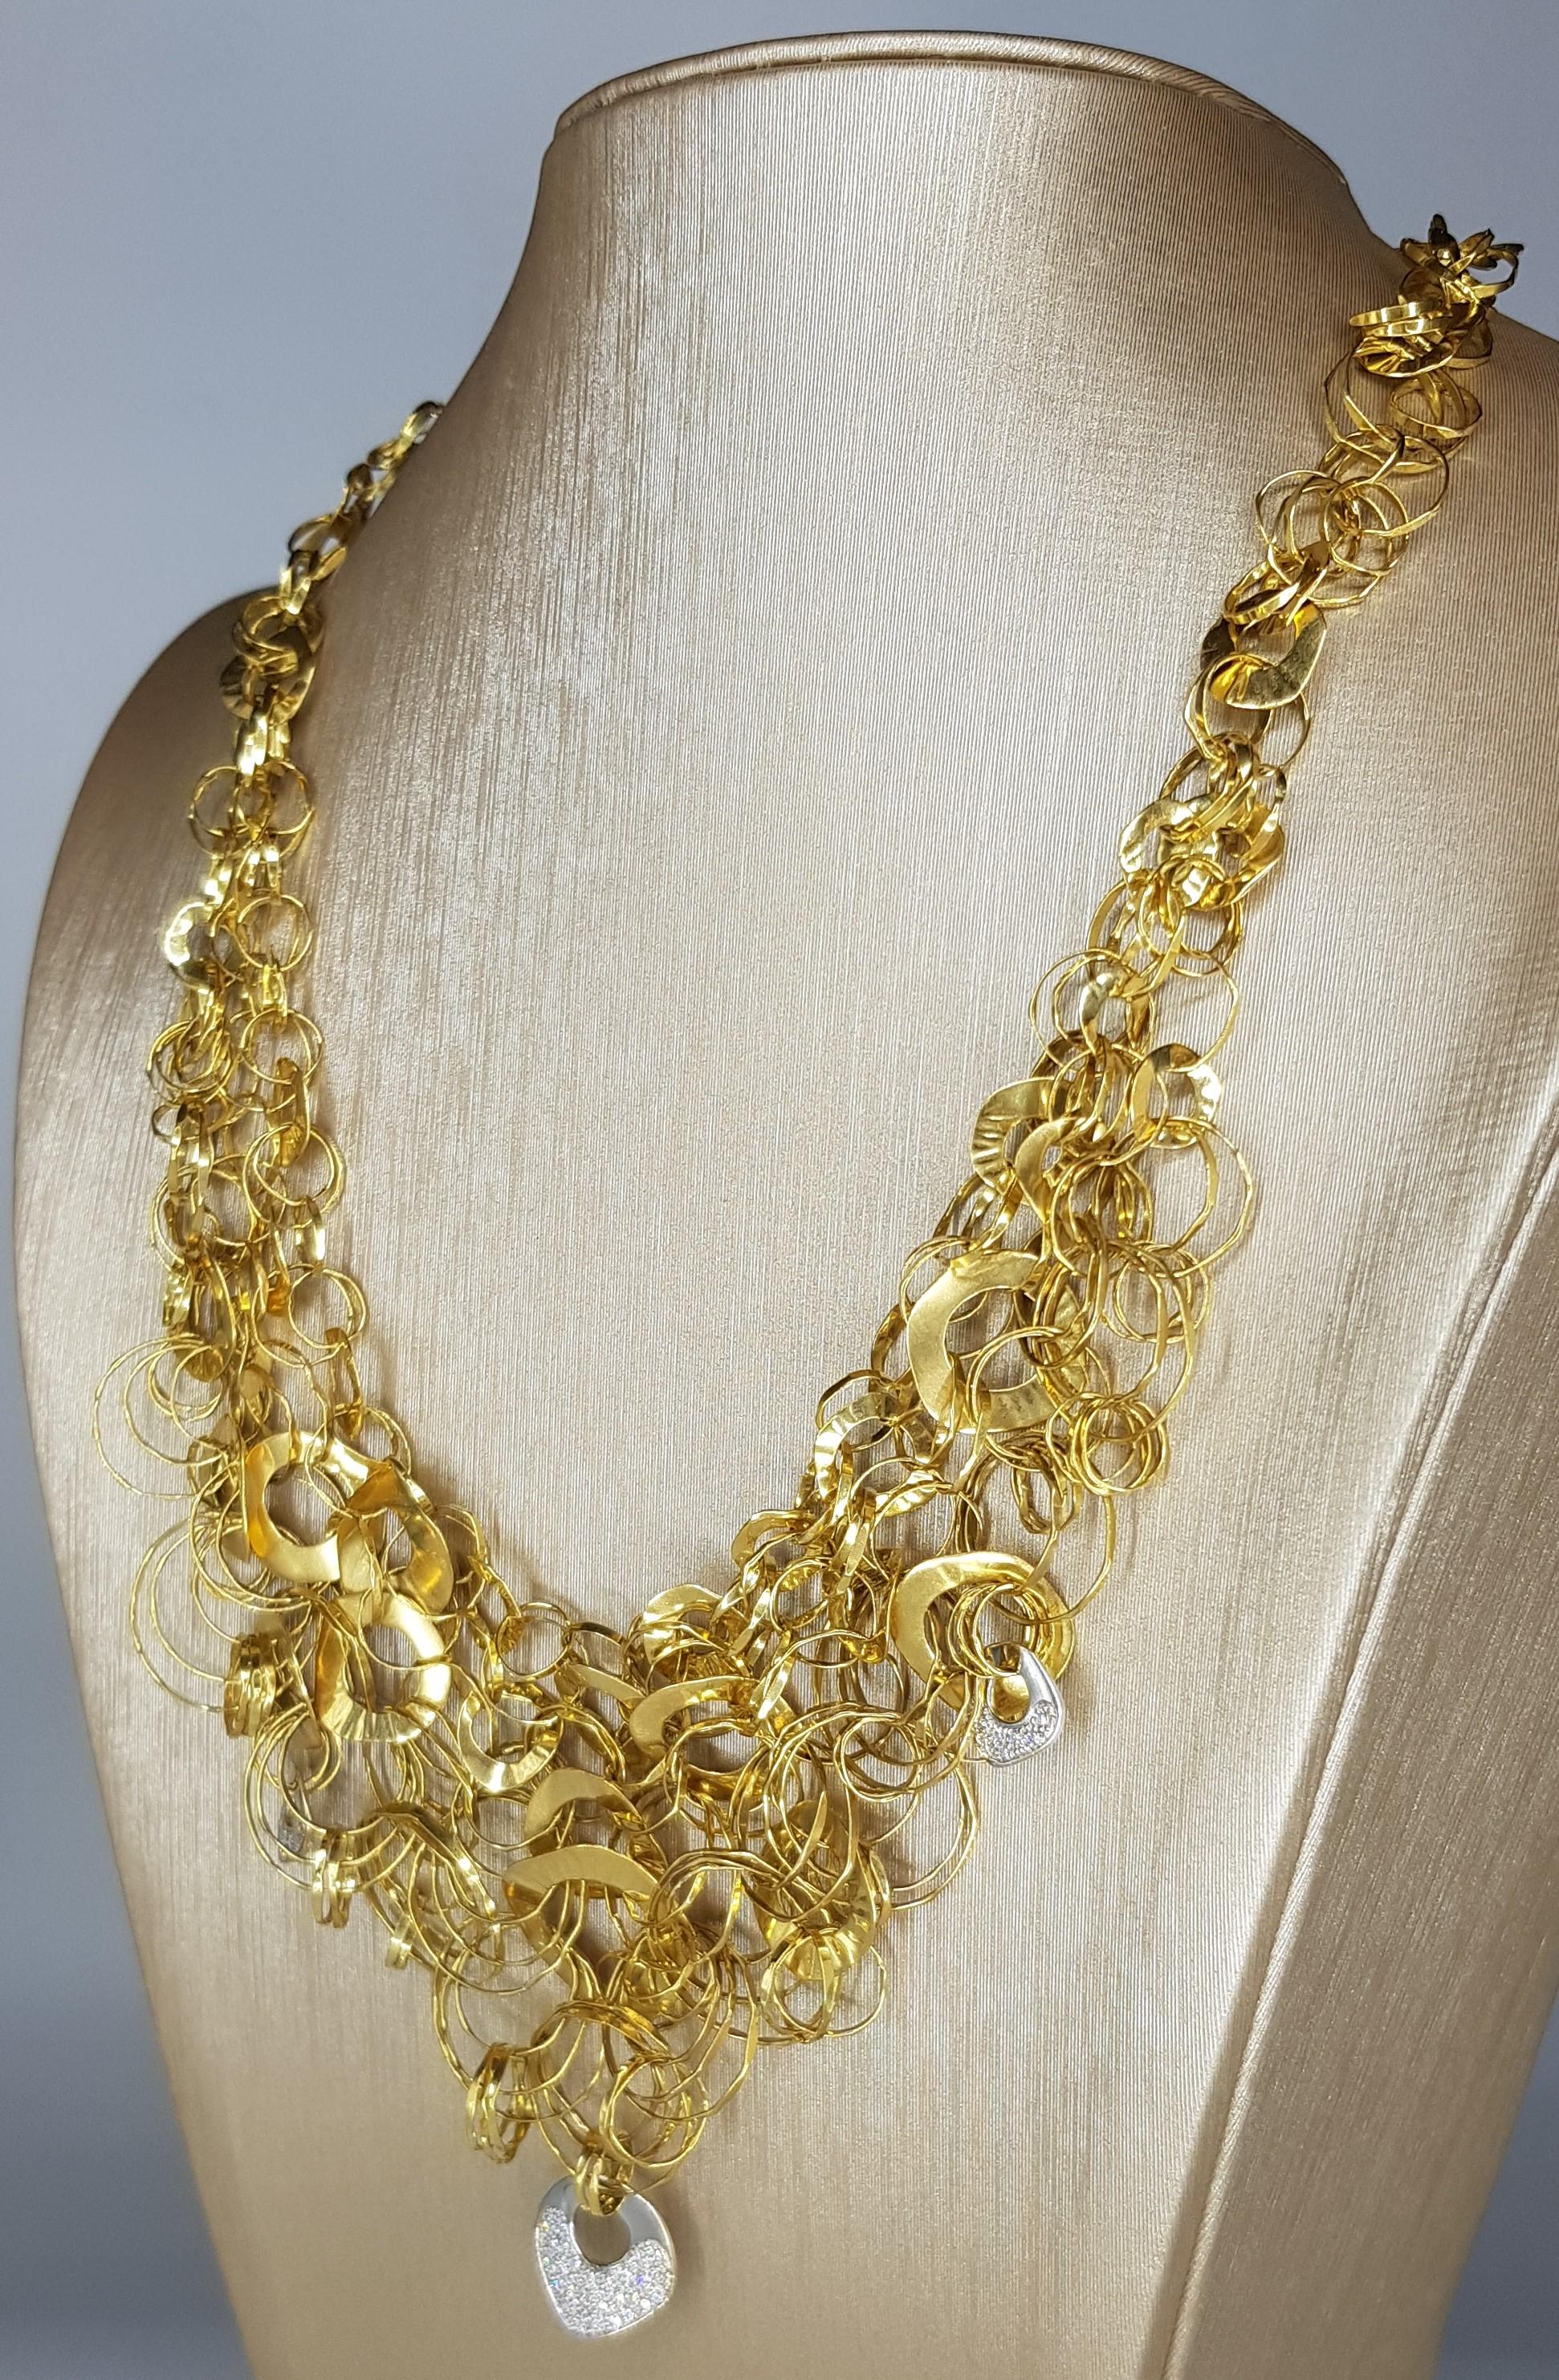 Orlandini 18k Yellow and White Gold with White Diamonds. The Necklace comprised of a plethora of interlocking hammered Yellow gold discs and rings with 3 White Gold discs and White Diamonds pavè (cts 0.73) 